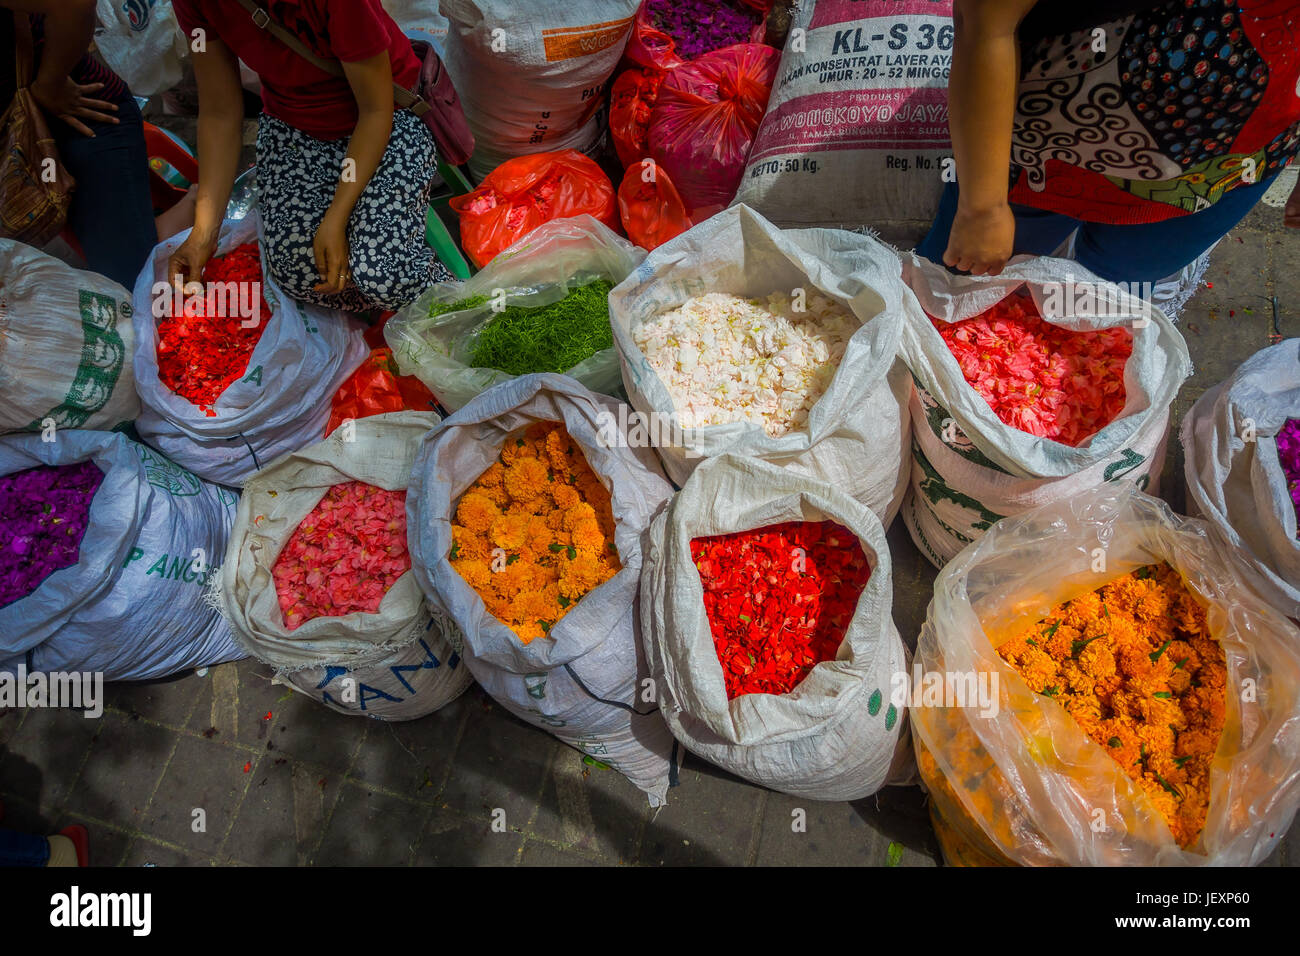 Outdoor Bali flower market. Flowers are used daily by Balinese Hindus as symbolic offerings at temples, inside of colorful baskets. Stock Photo